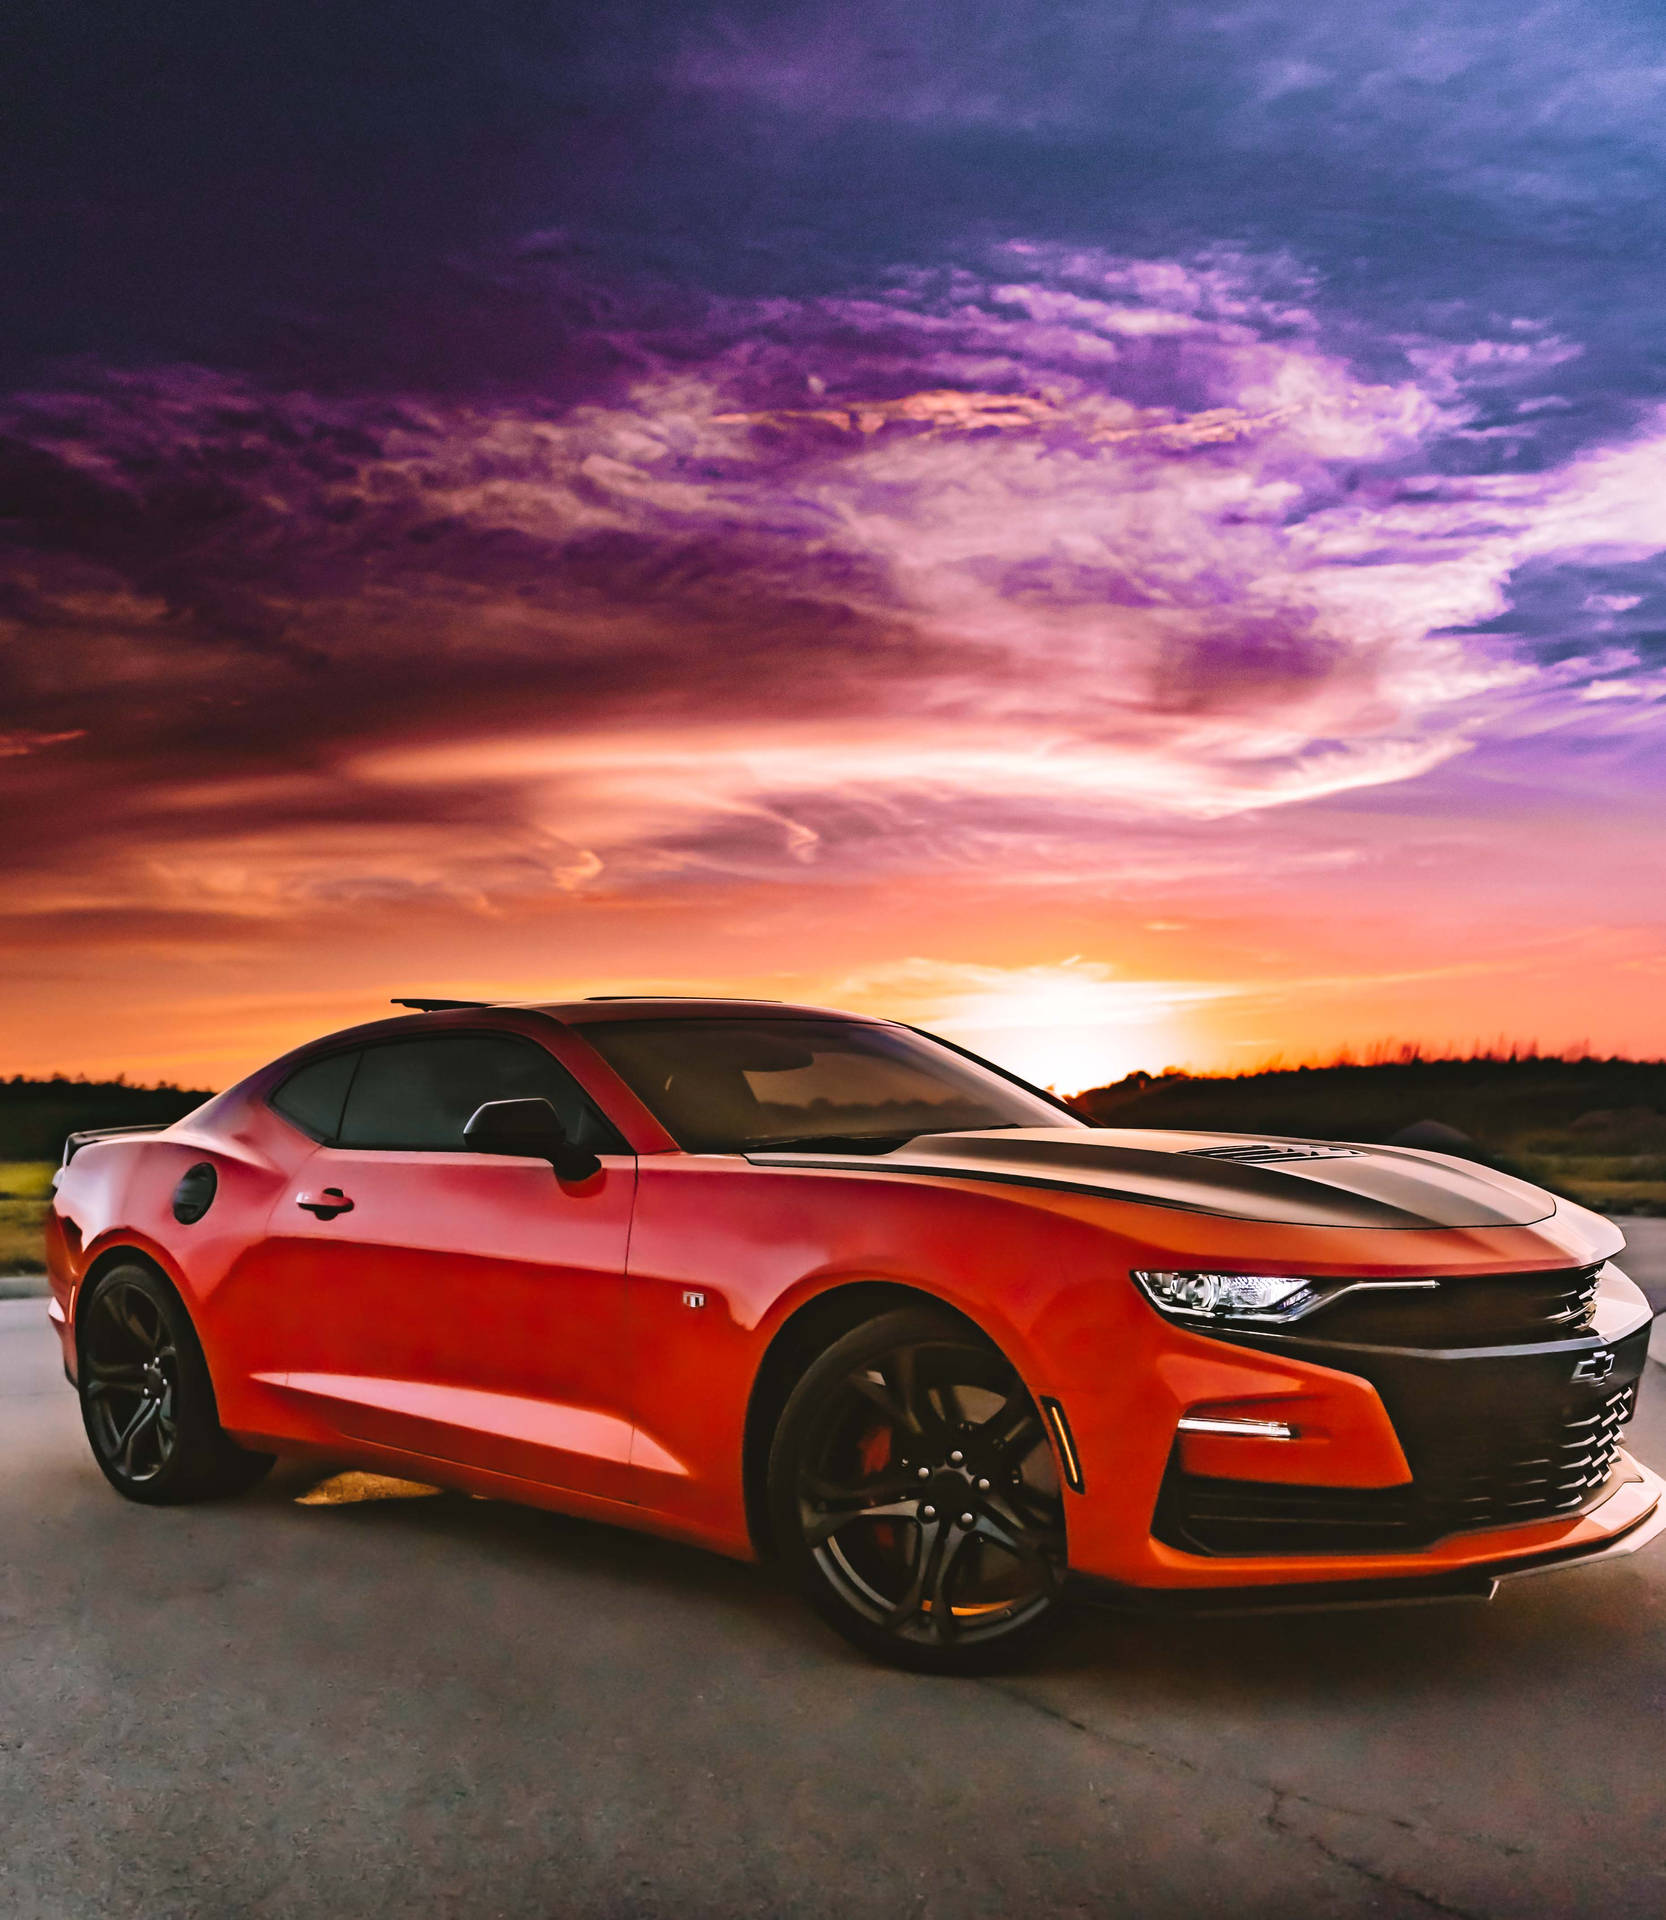 Chevrolet Car With Sunset